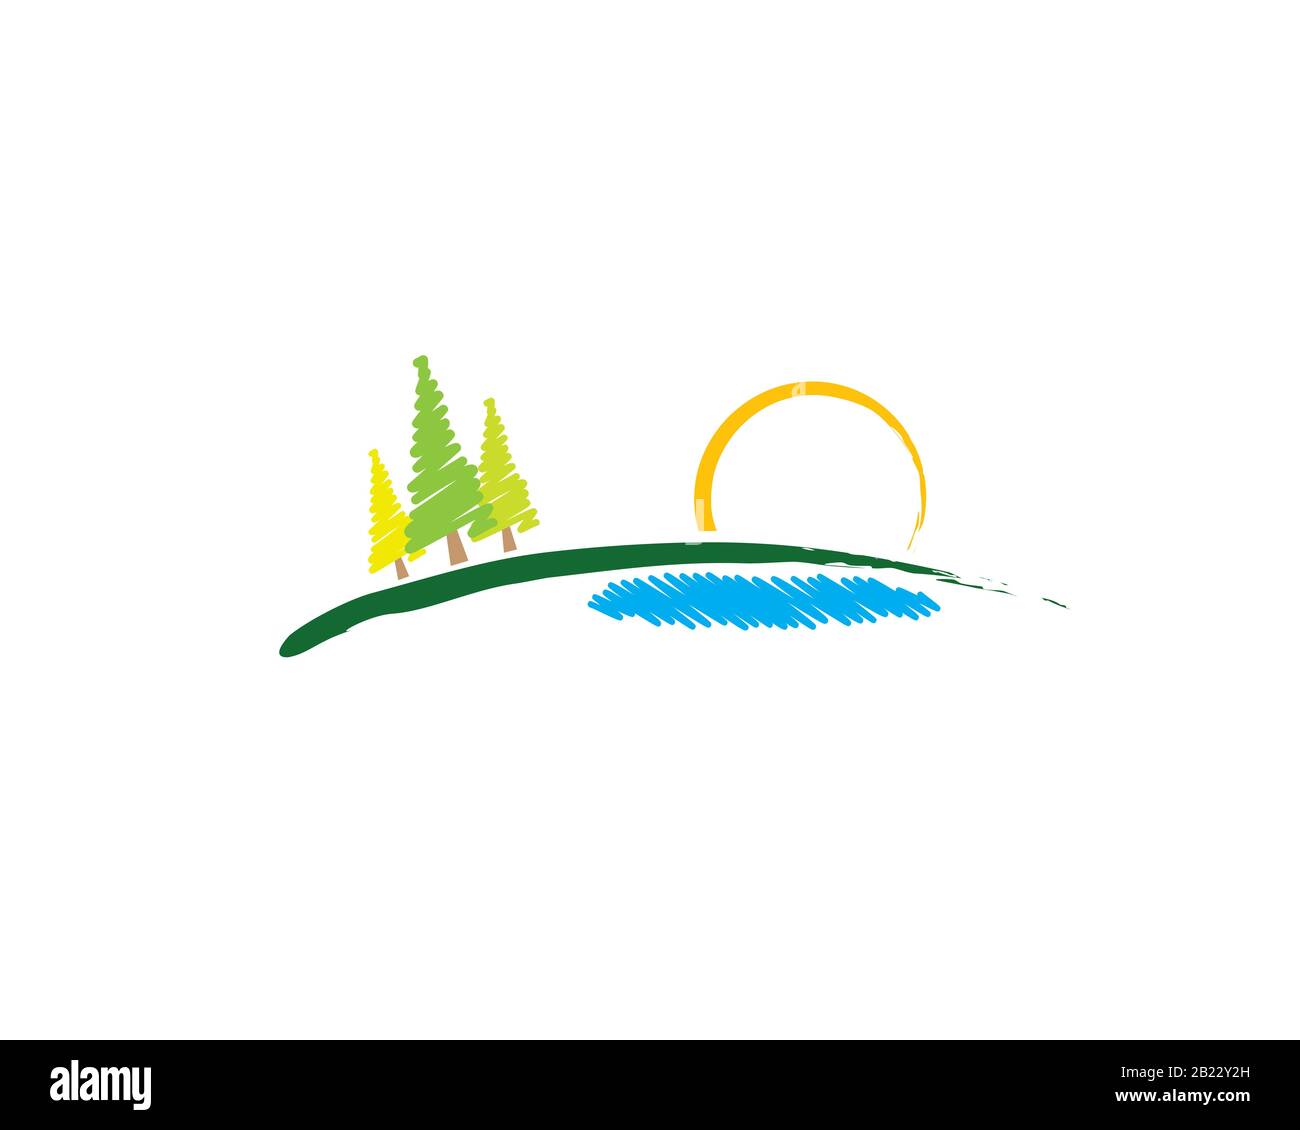 country side mountain landsacape view with meadow land ground pine trees river lake and abstract circle brush Stock Vector